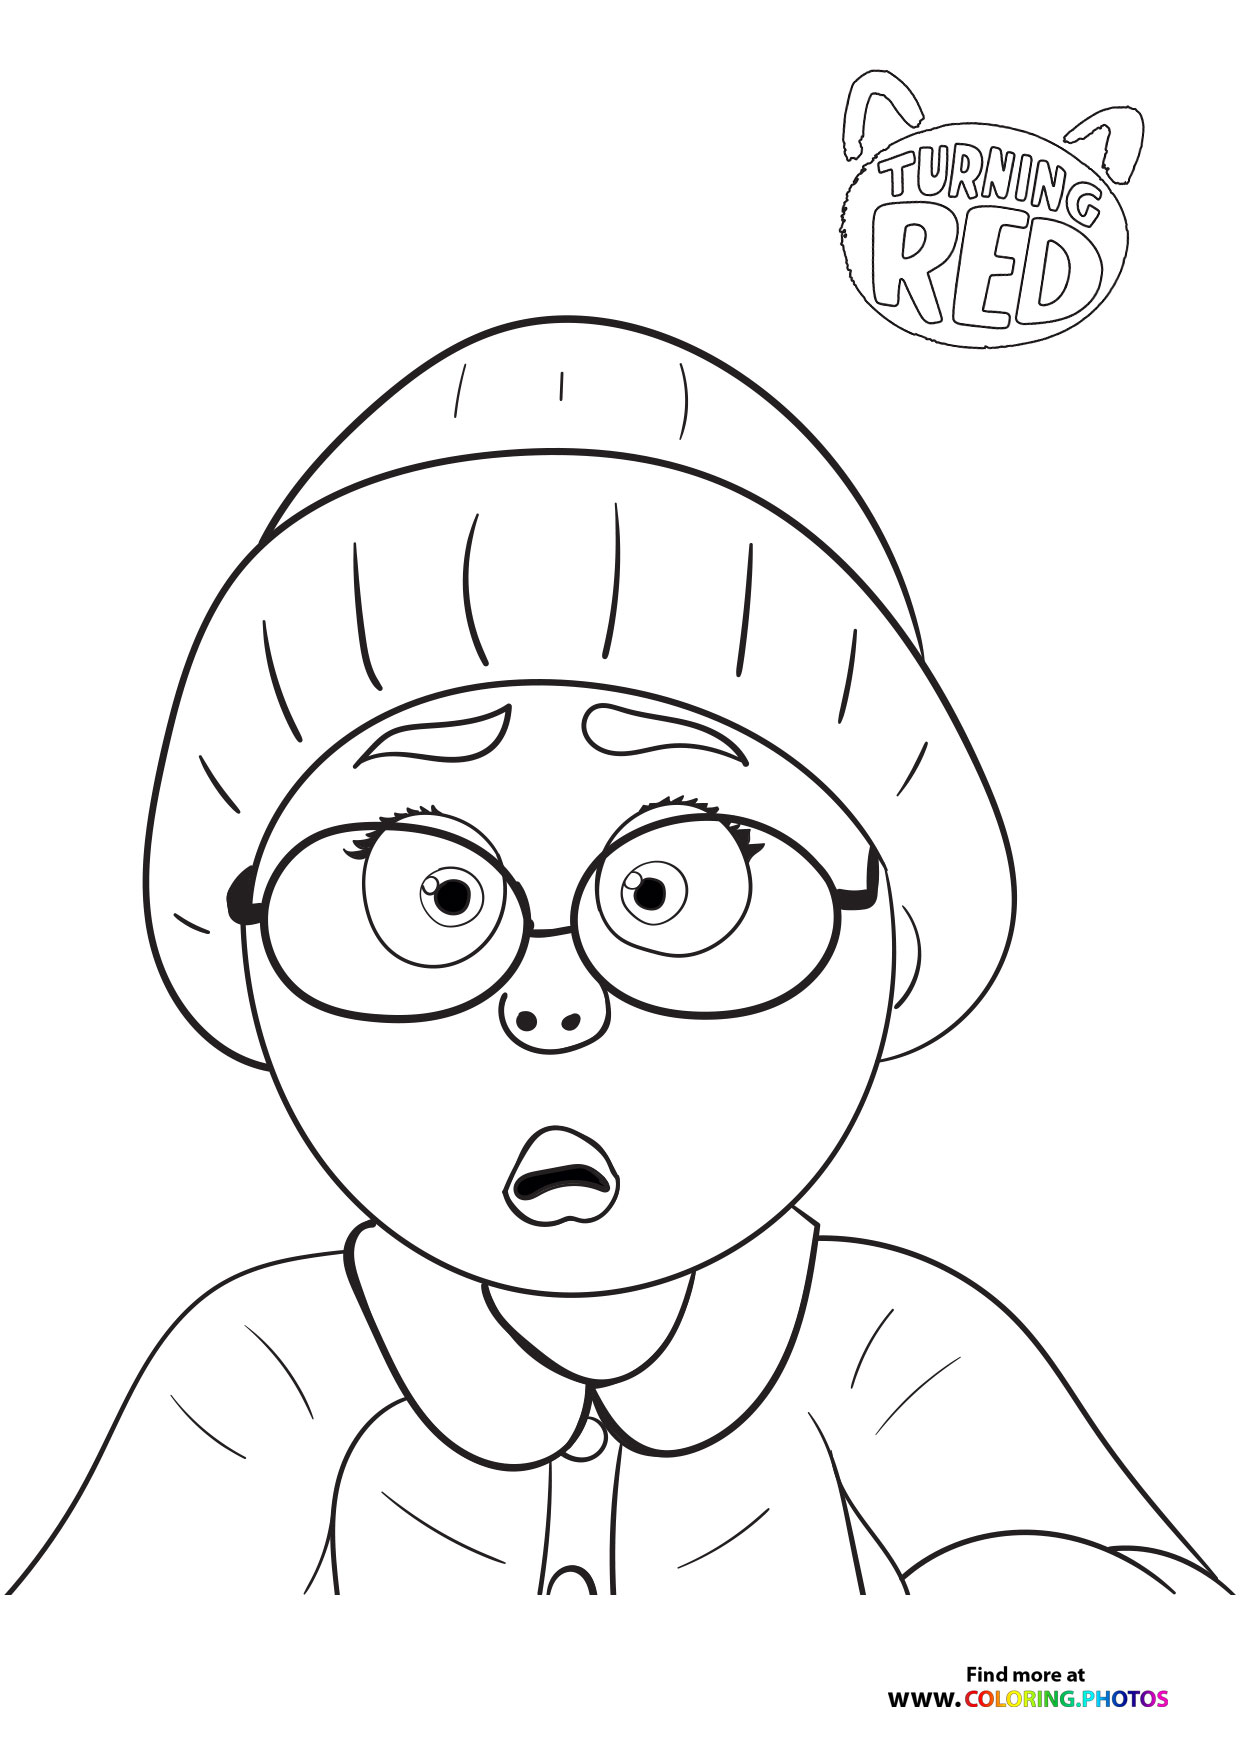 Mei Lee with a hat - Coloring Pages for kids